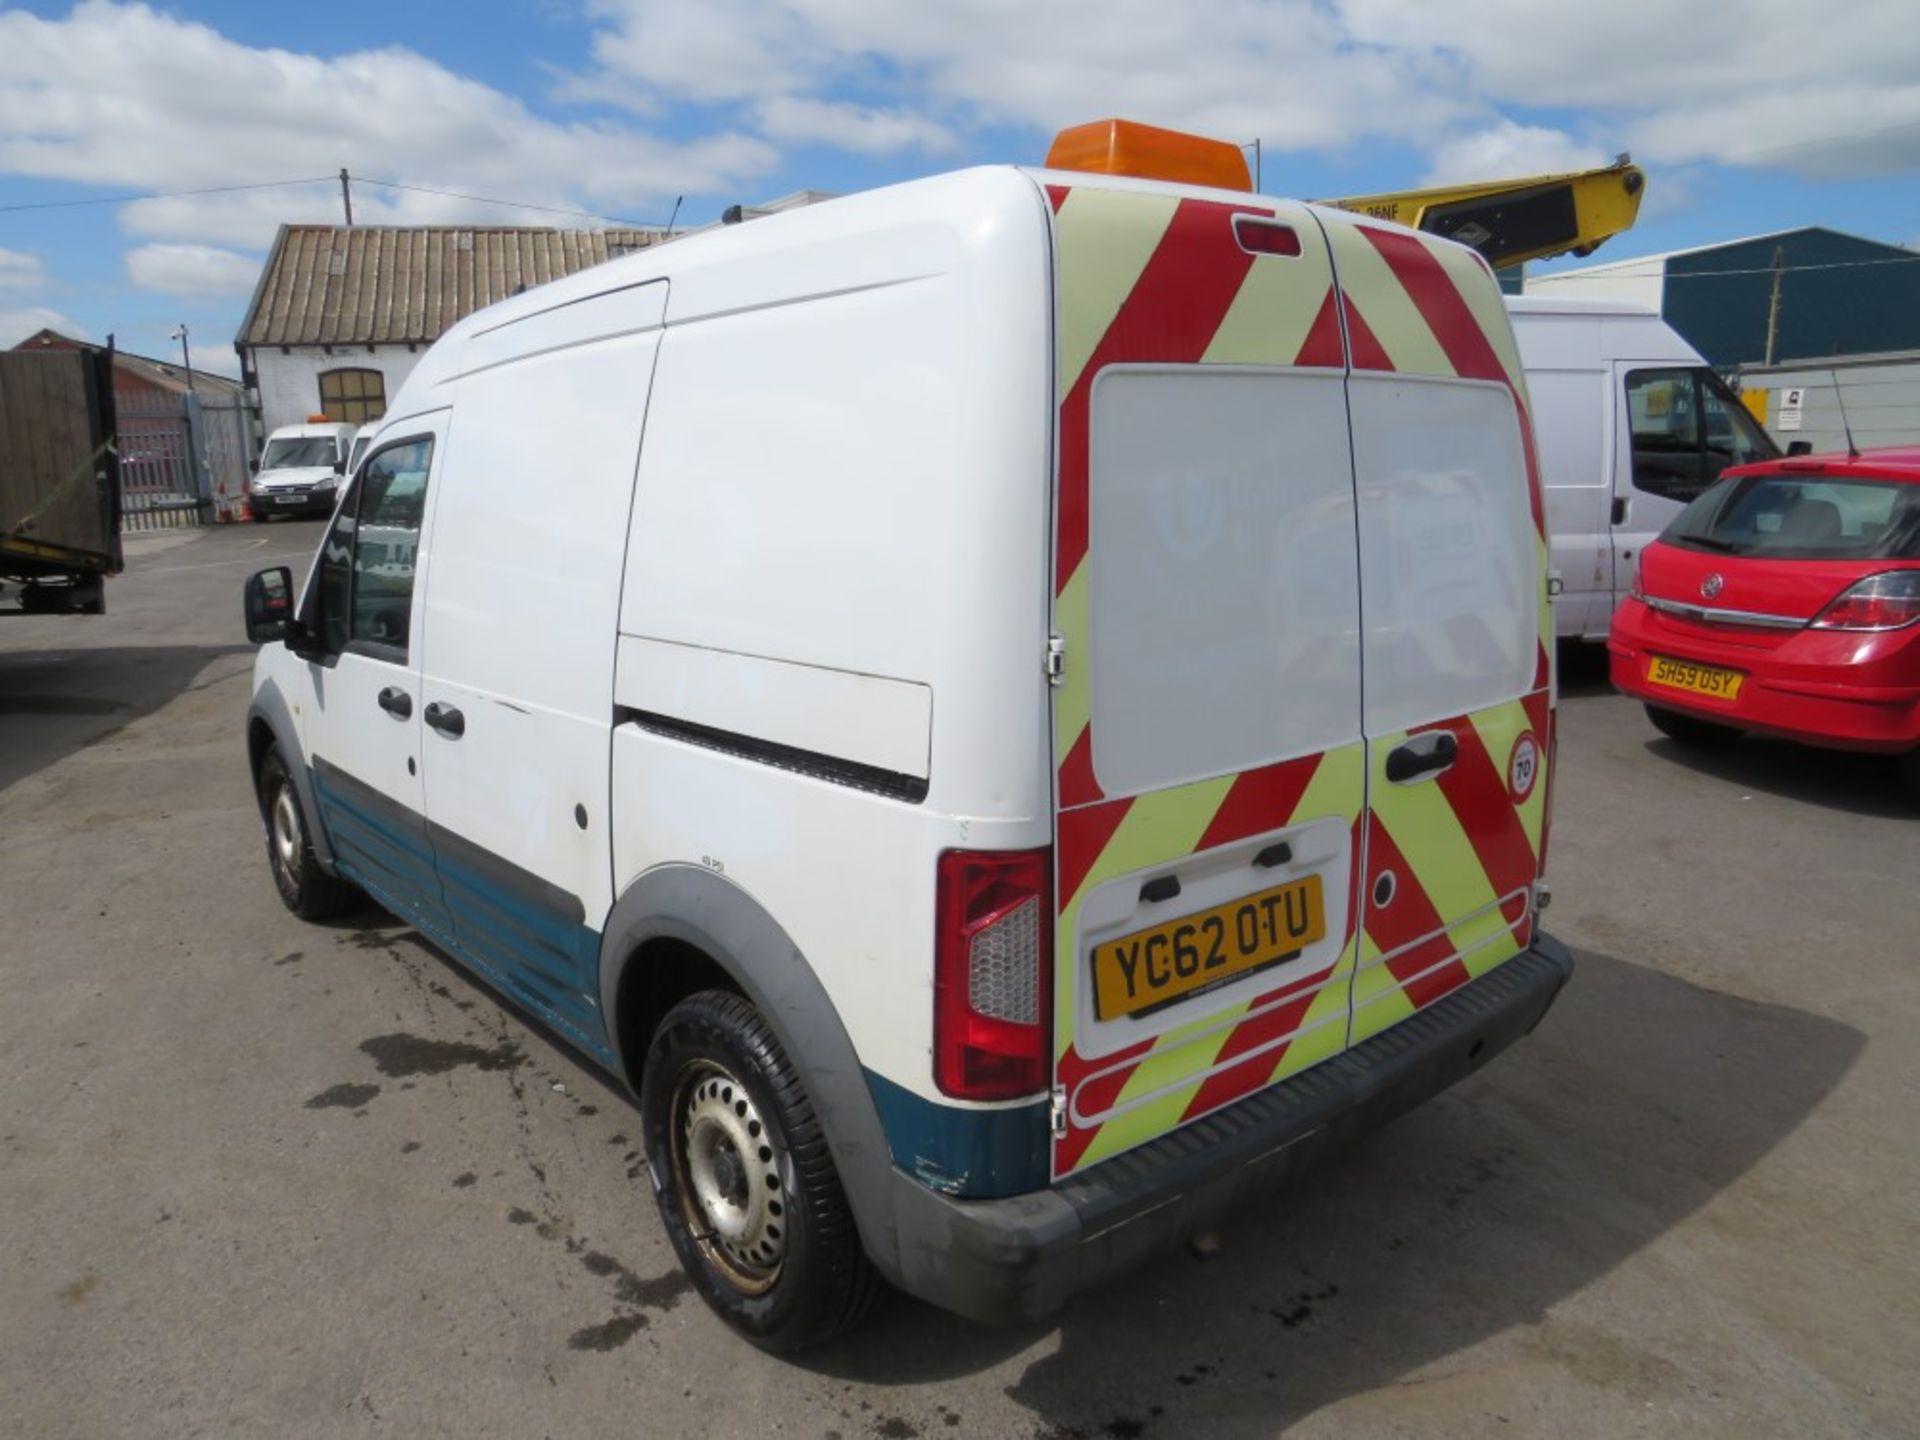 62 reg FORD TRANSIT CONNECT (DIRECT UNITED UTILITIES WATER) 1ST REG 10/12, TEST 08/21, [+ VAT] - Image 3 of 7